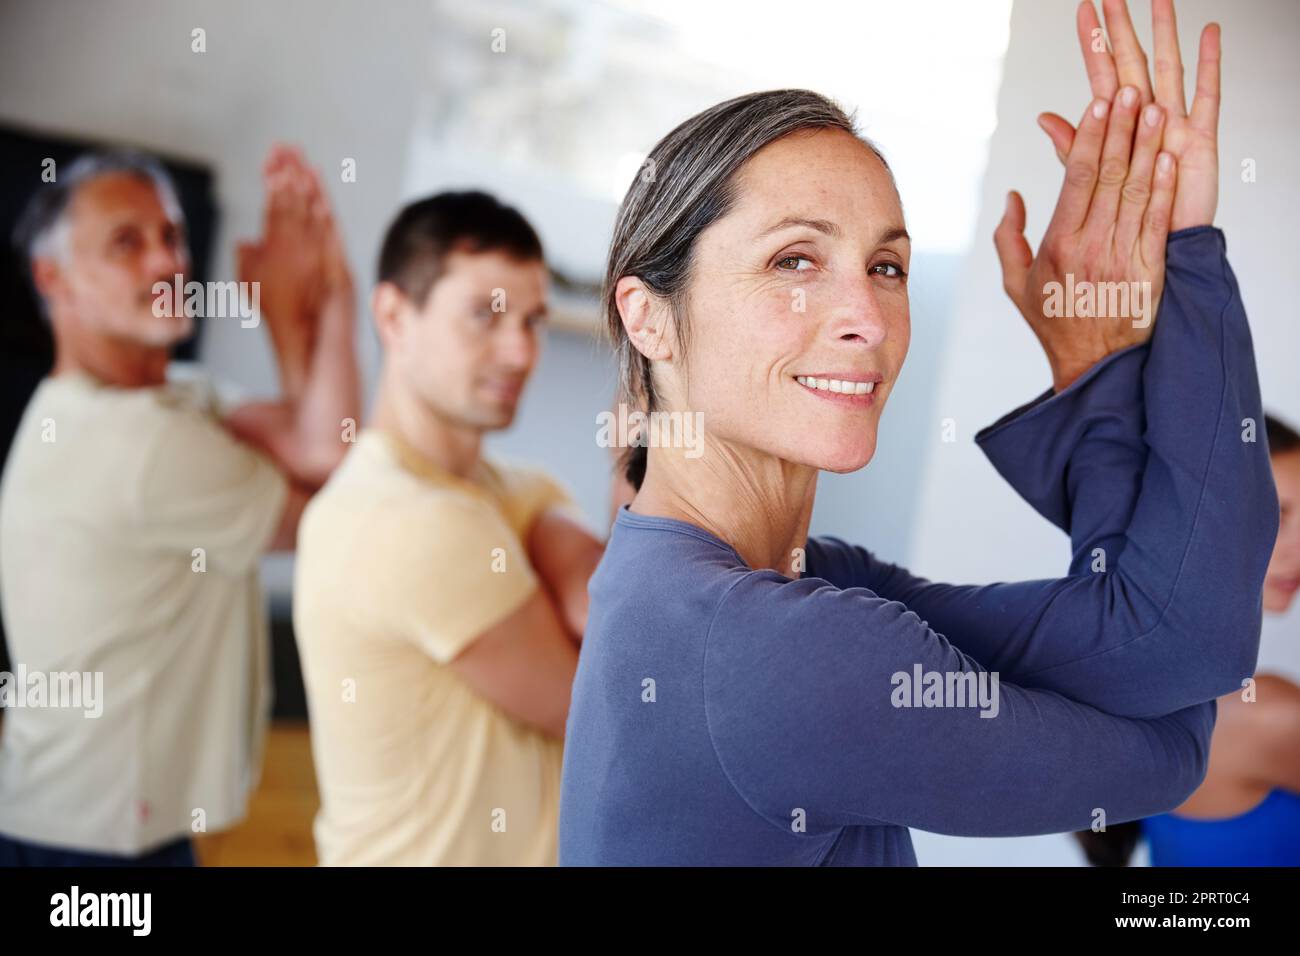 Healthy bodies are built here. A group of people taking a class together at gym. Stock Photo